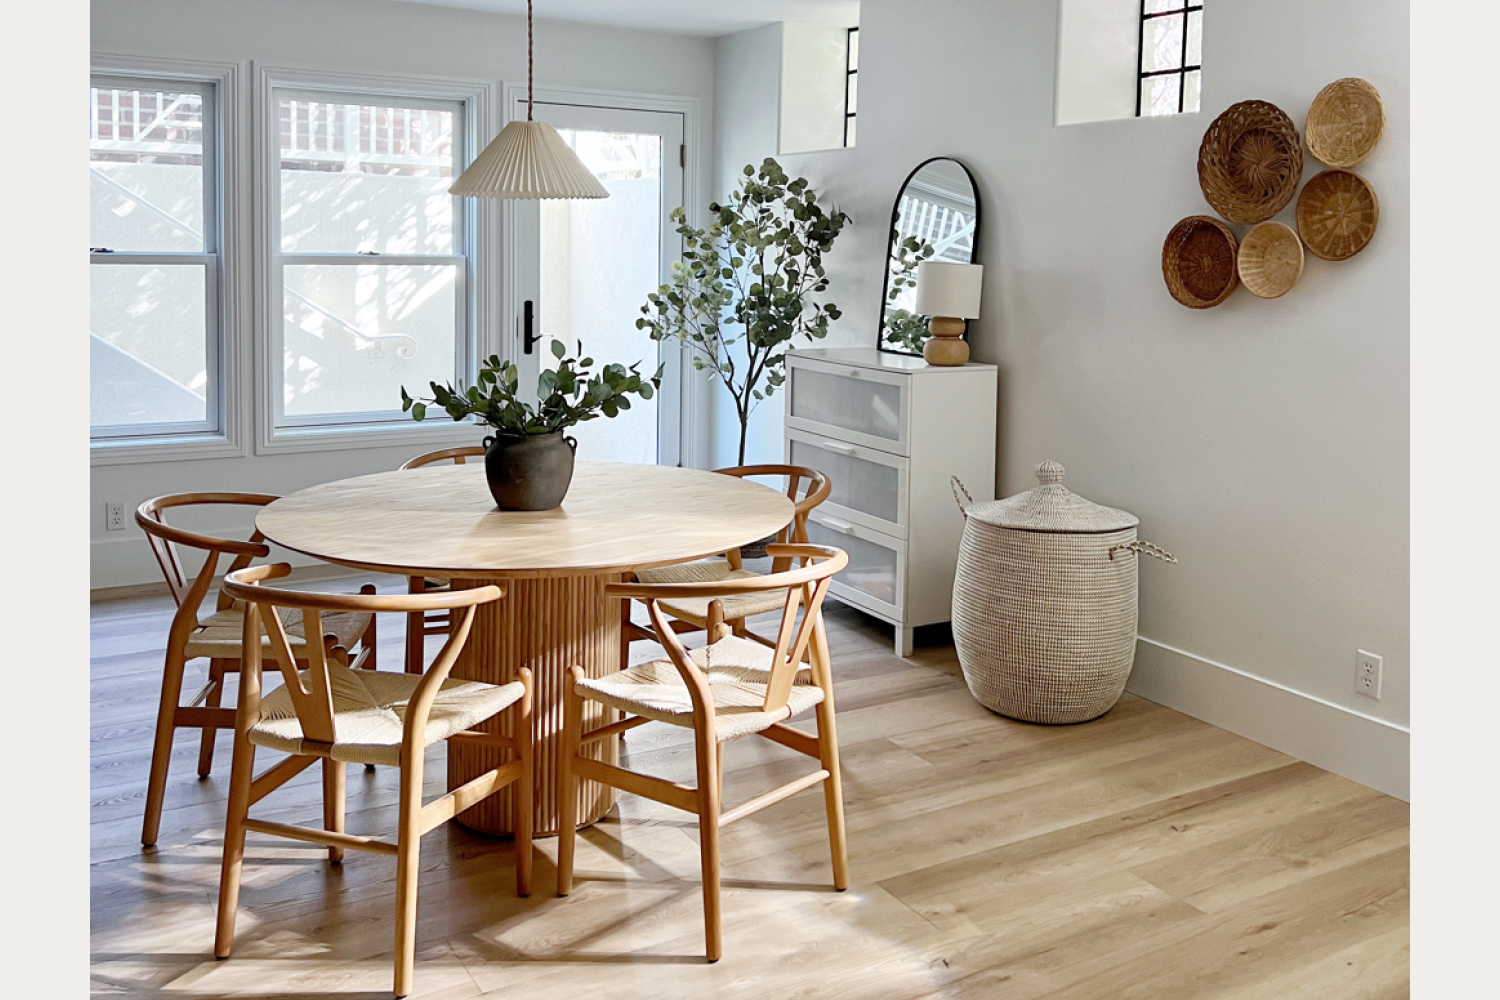 Piper Fluted Natural Wood Round Dining Table by Eternity Modern. 